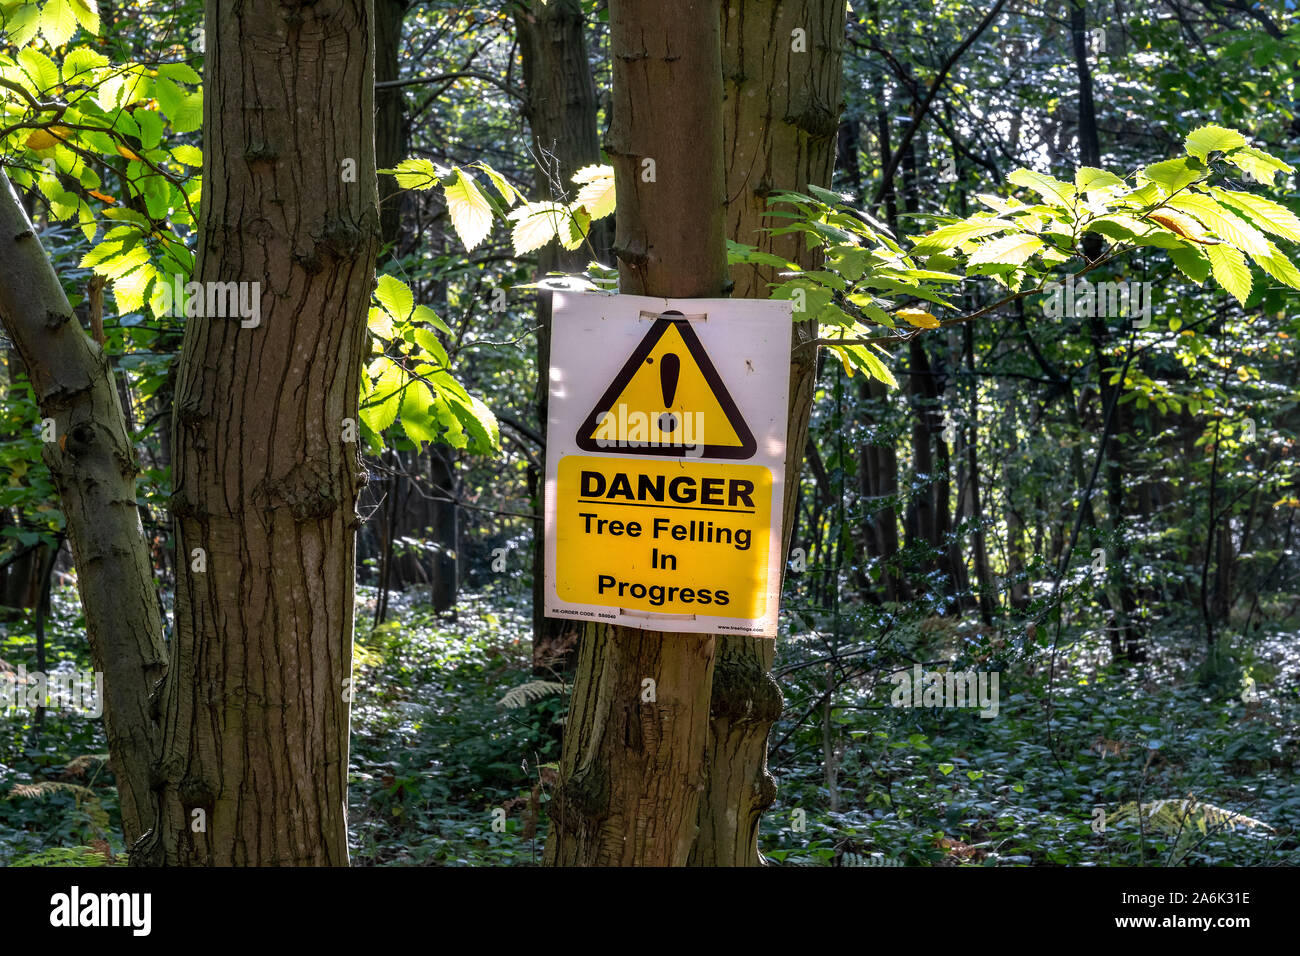 TREE FELLING WARNING SIGN IN WOODS Stock Photo